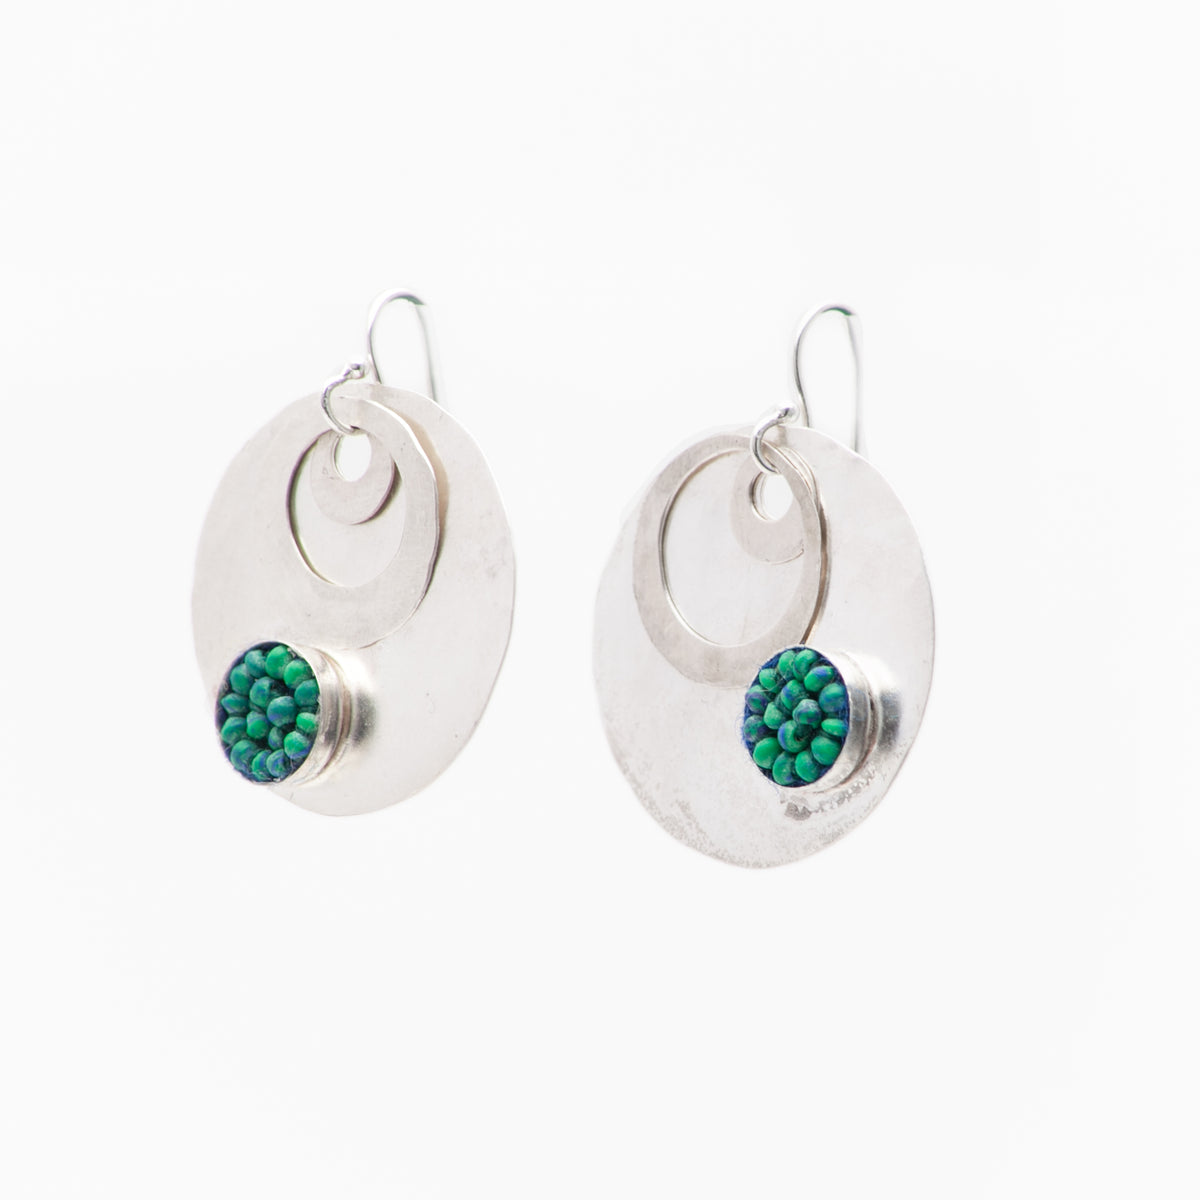 Iconic Hand Hammered Silver Coin with Azurite Mosaic Earrings